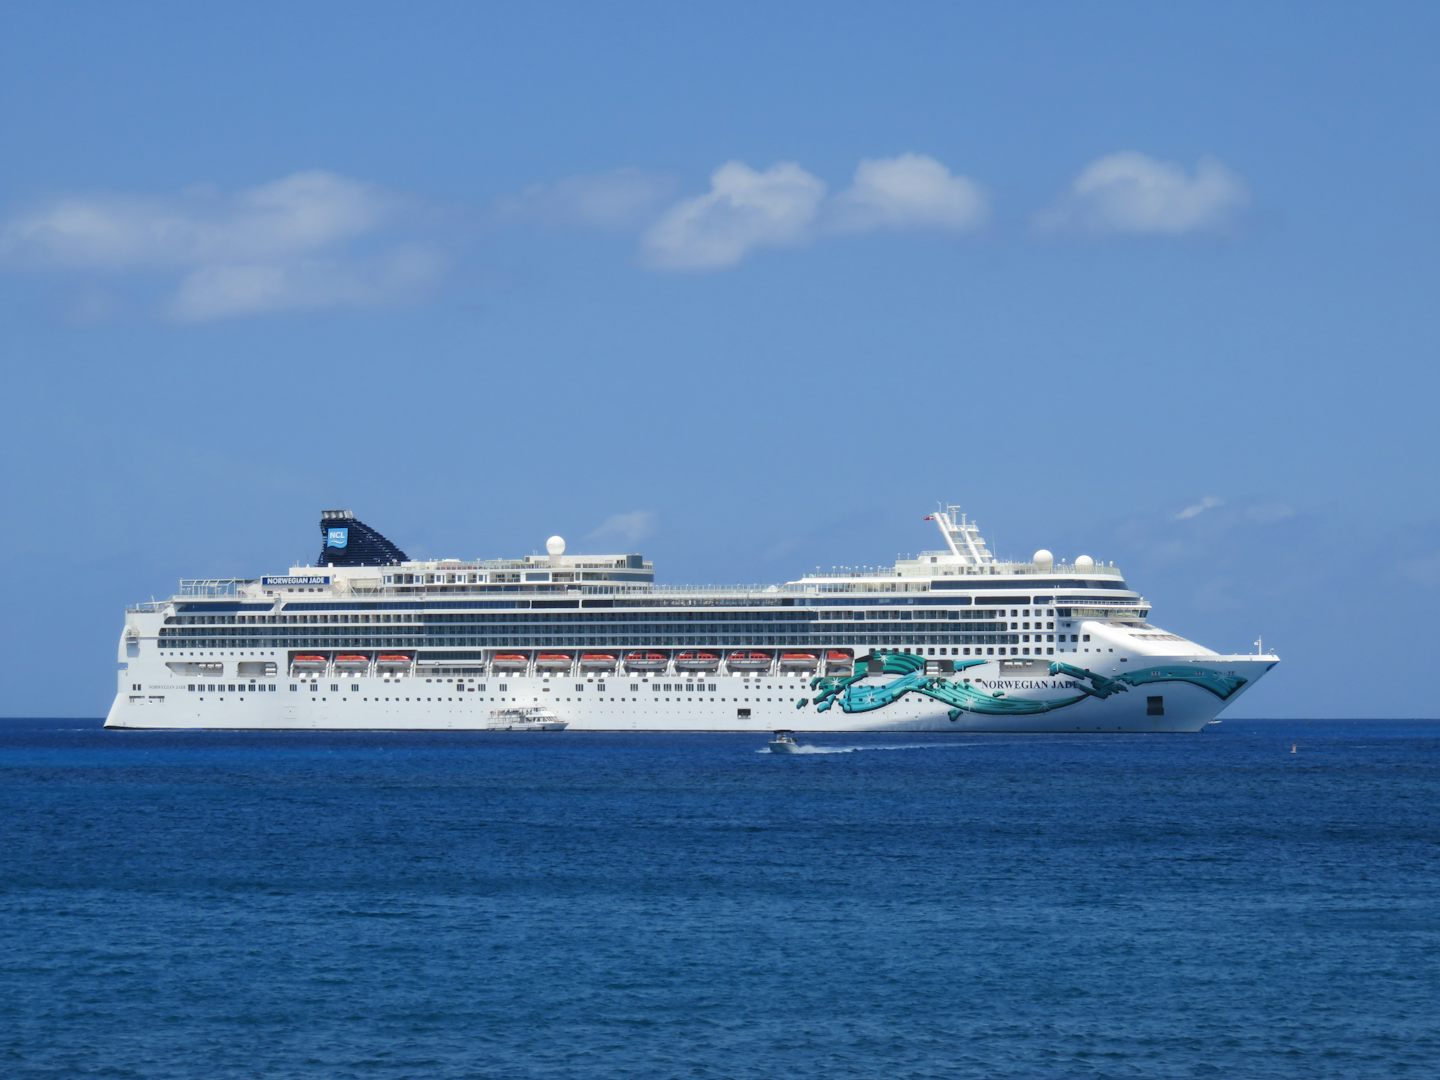 Photo of the Norwegian Jade docked at Grand Cayman during our latest cruise